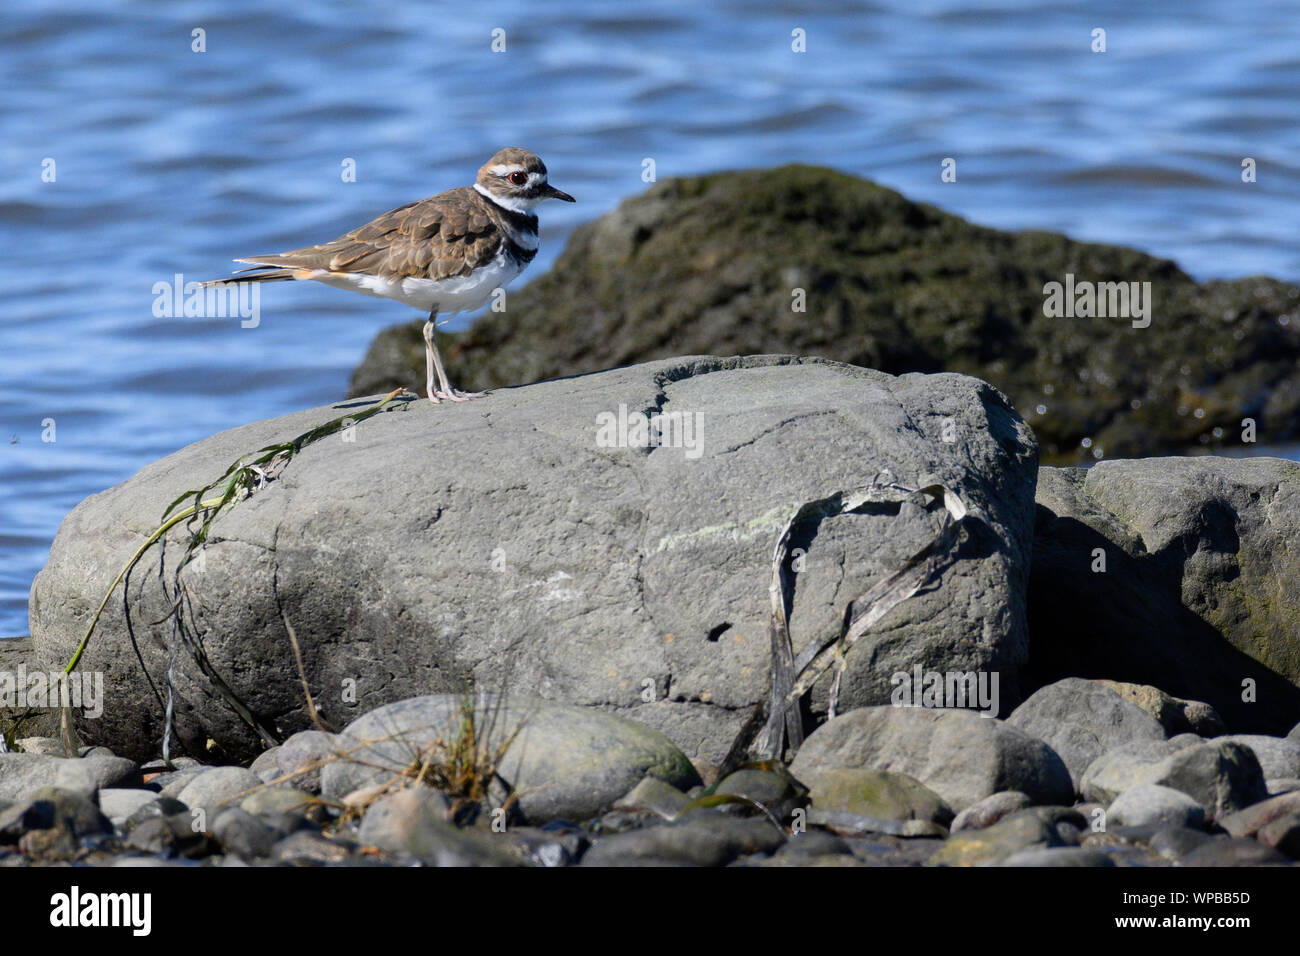 A Killdeer on the shore of Comox Harbour Stock Photo